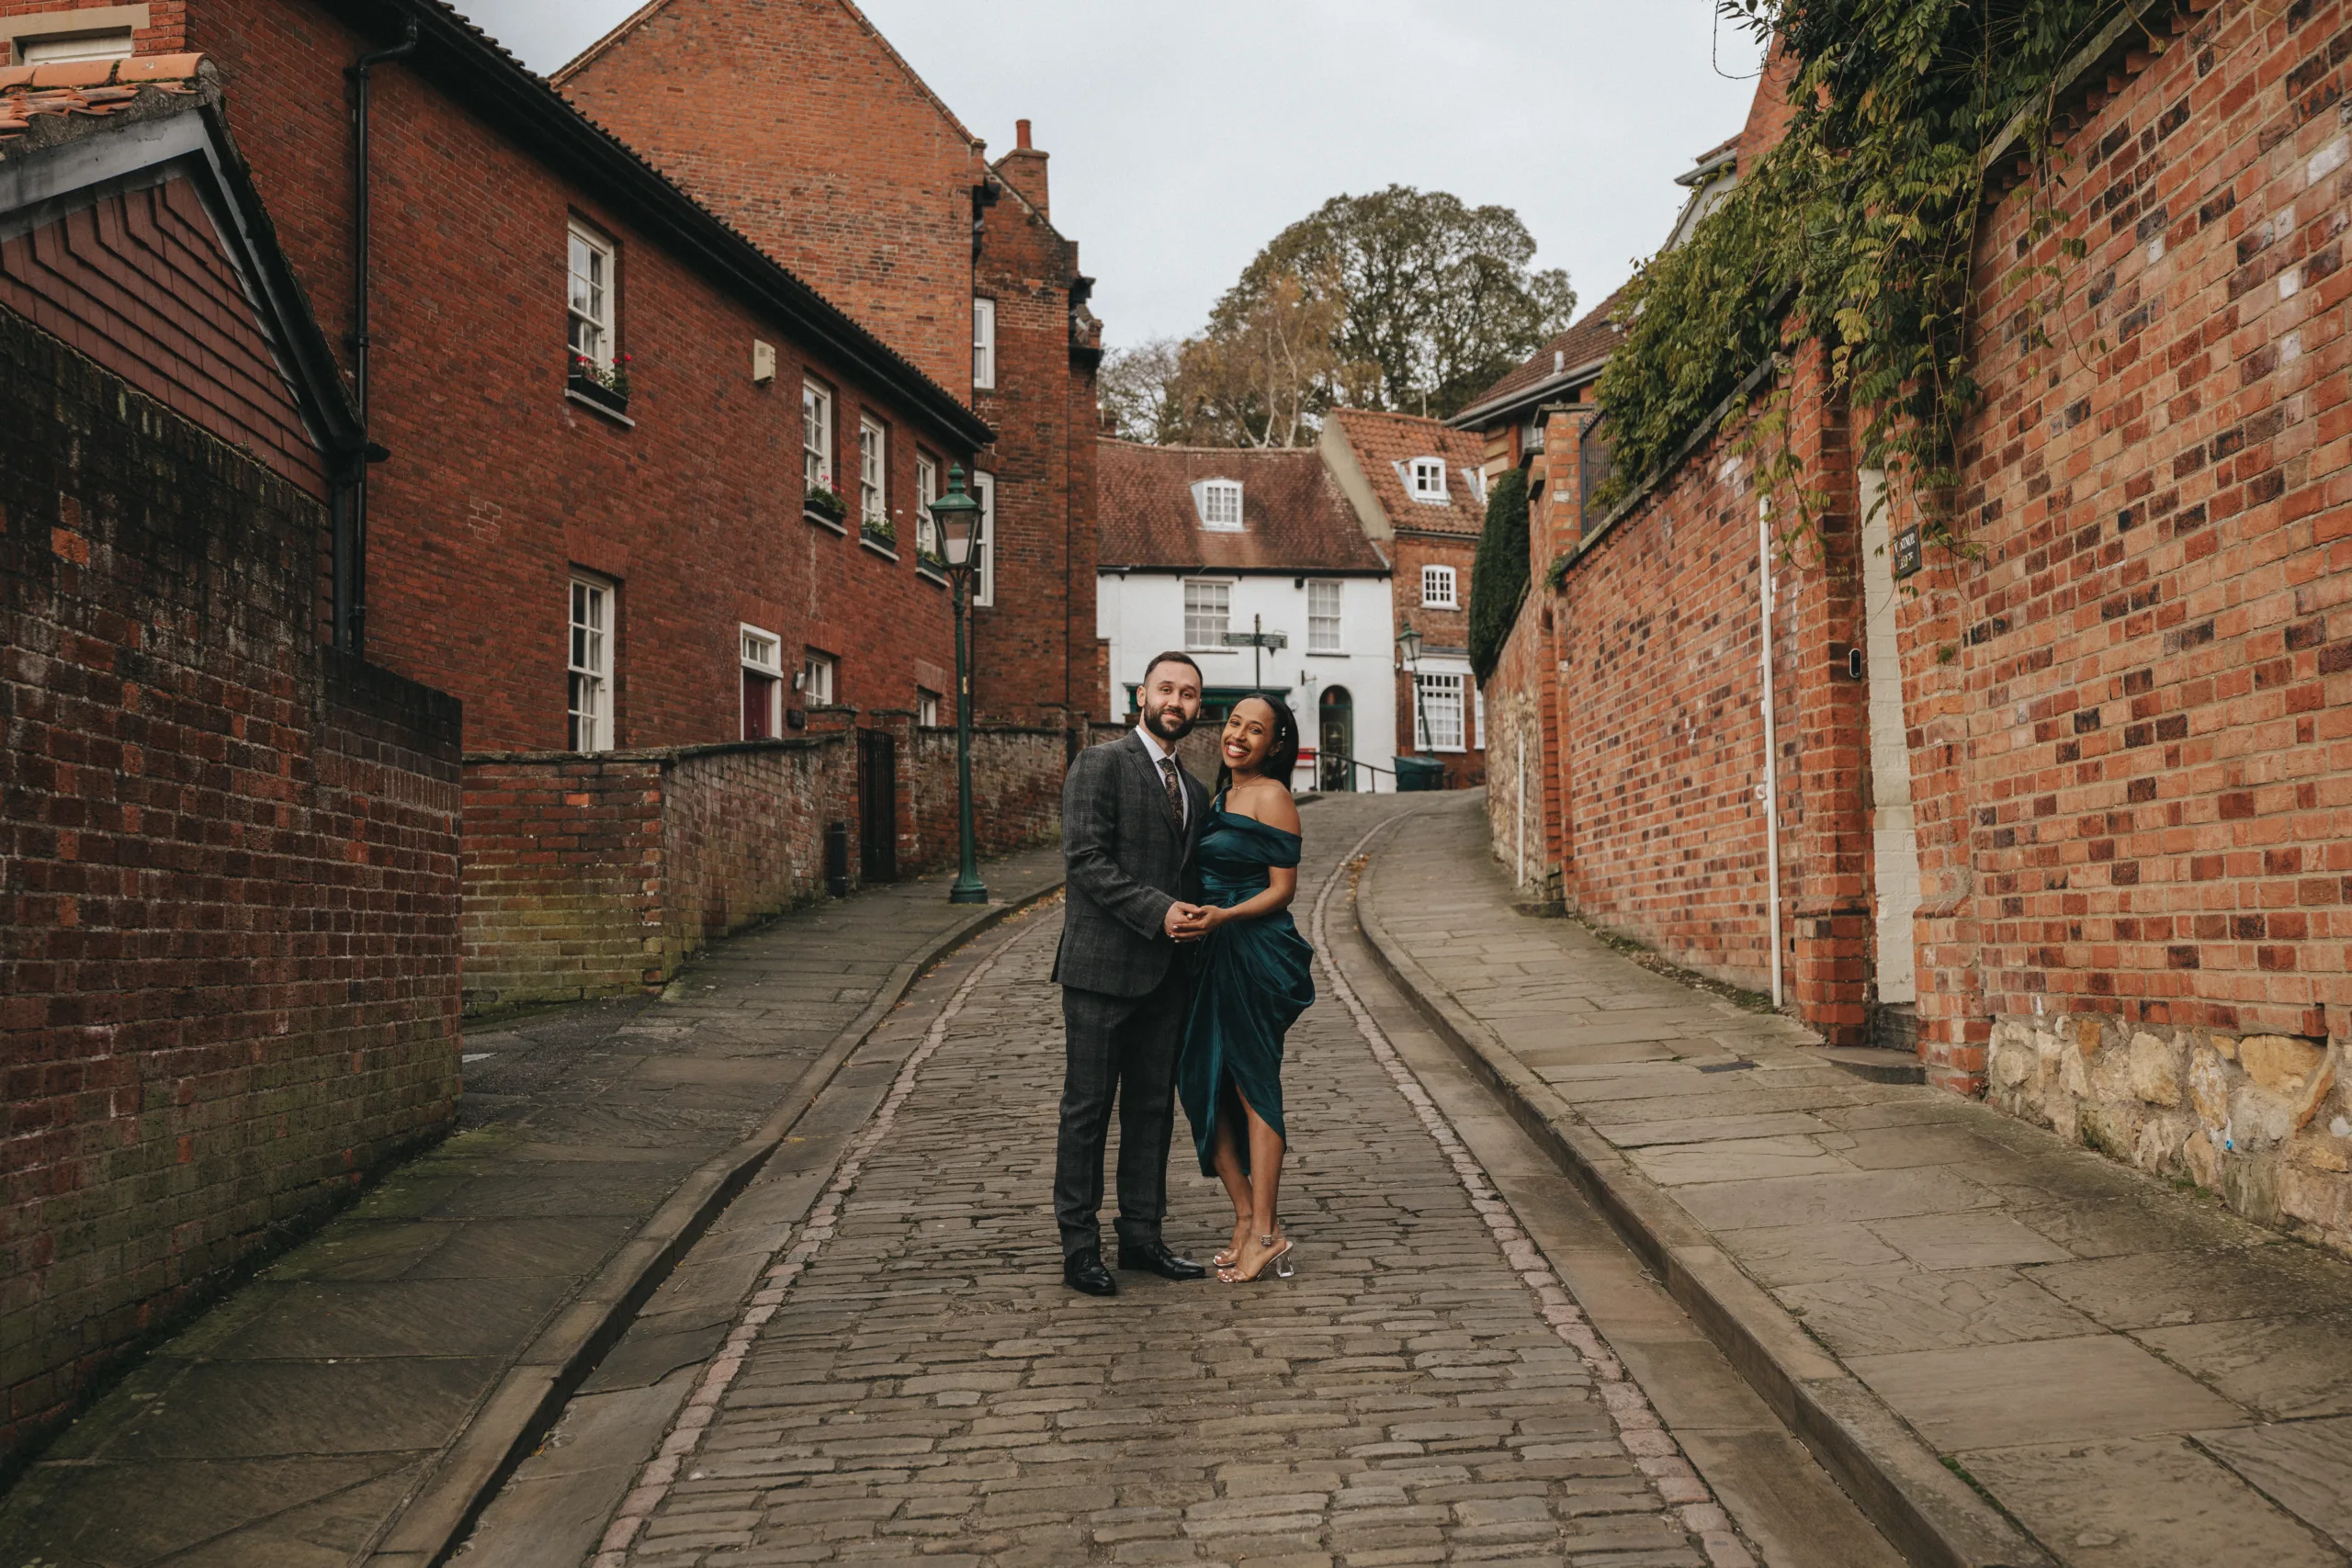 A wedding photographer capturing an engaged couple on a cobblestone street.